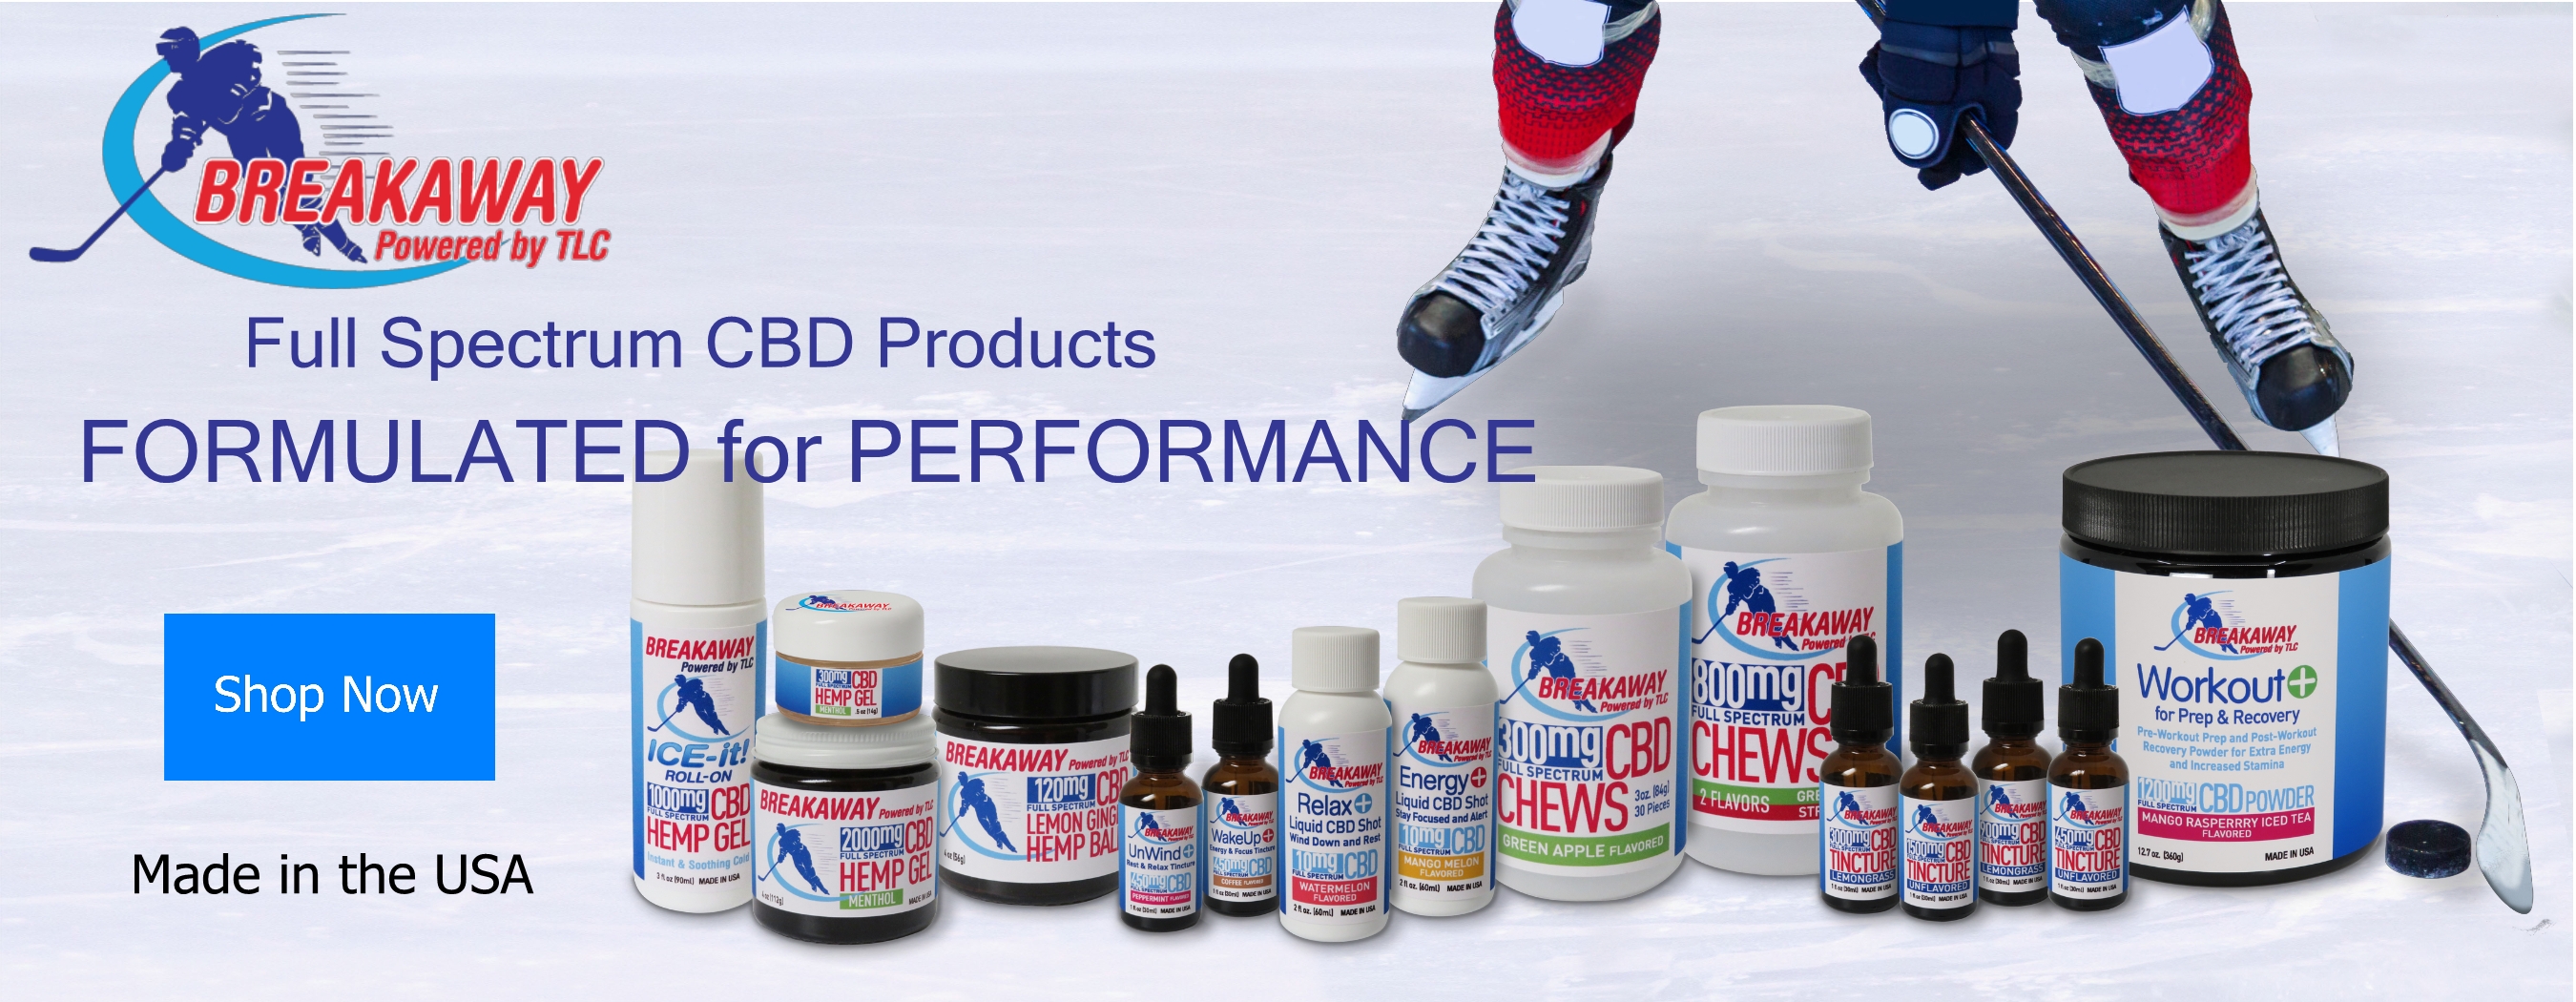 A High Performance Brand for Hockey Players and Other Athletes